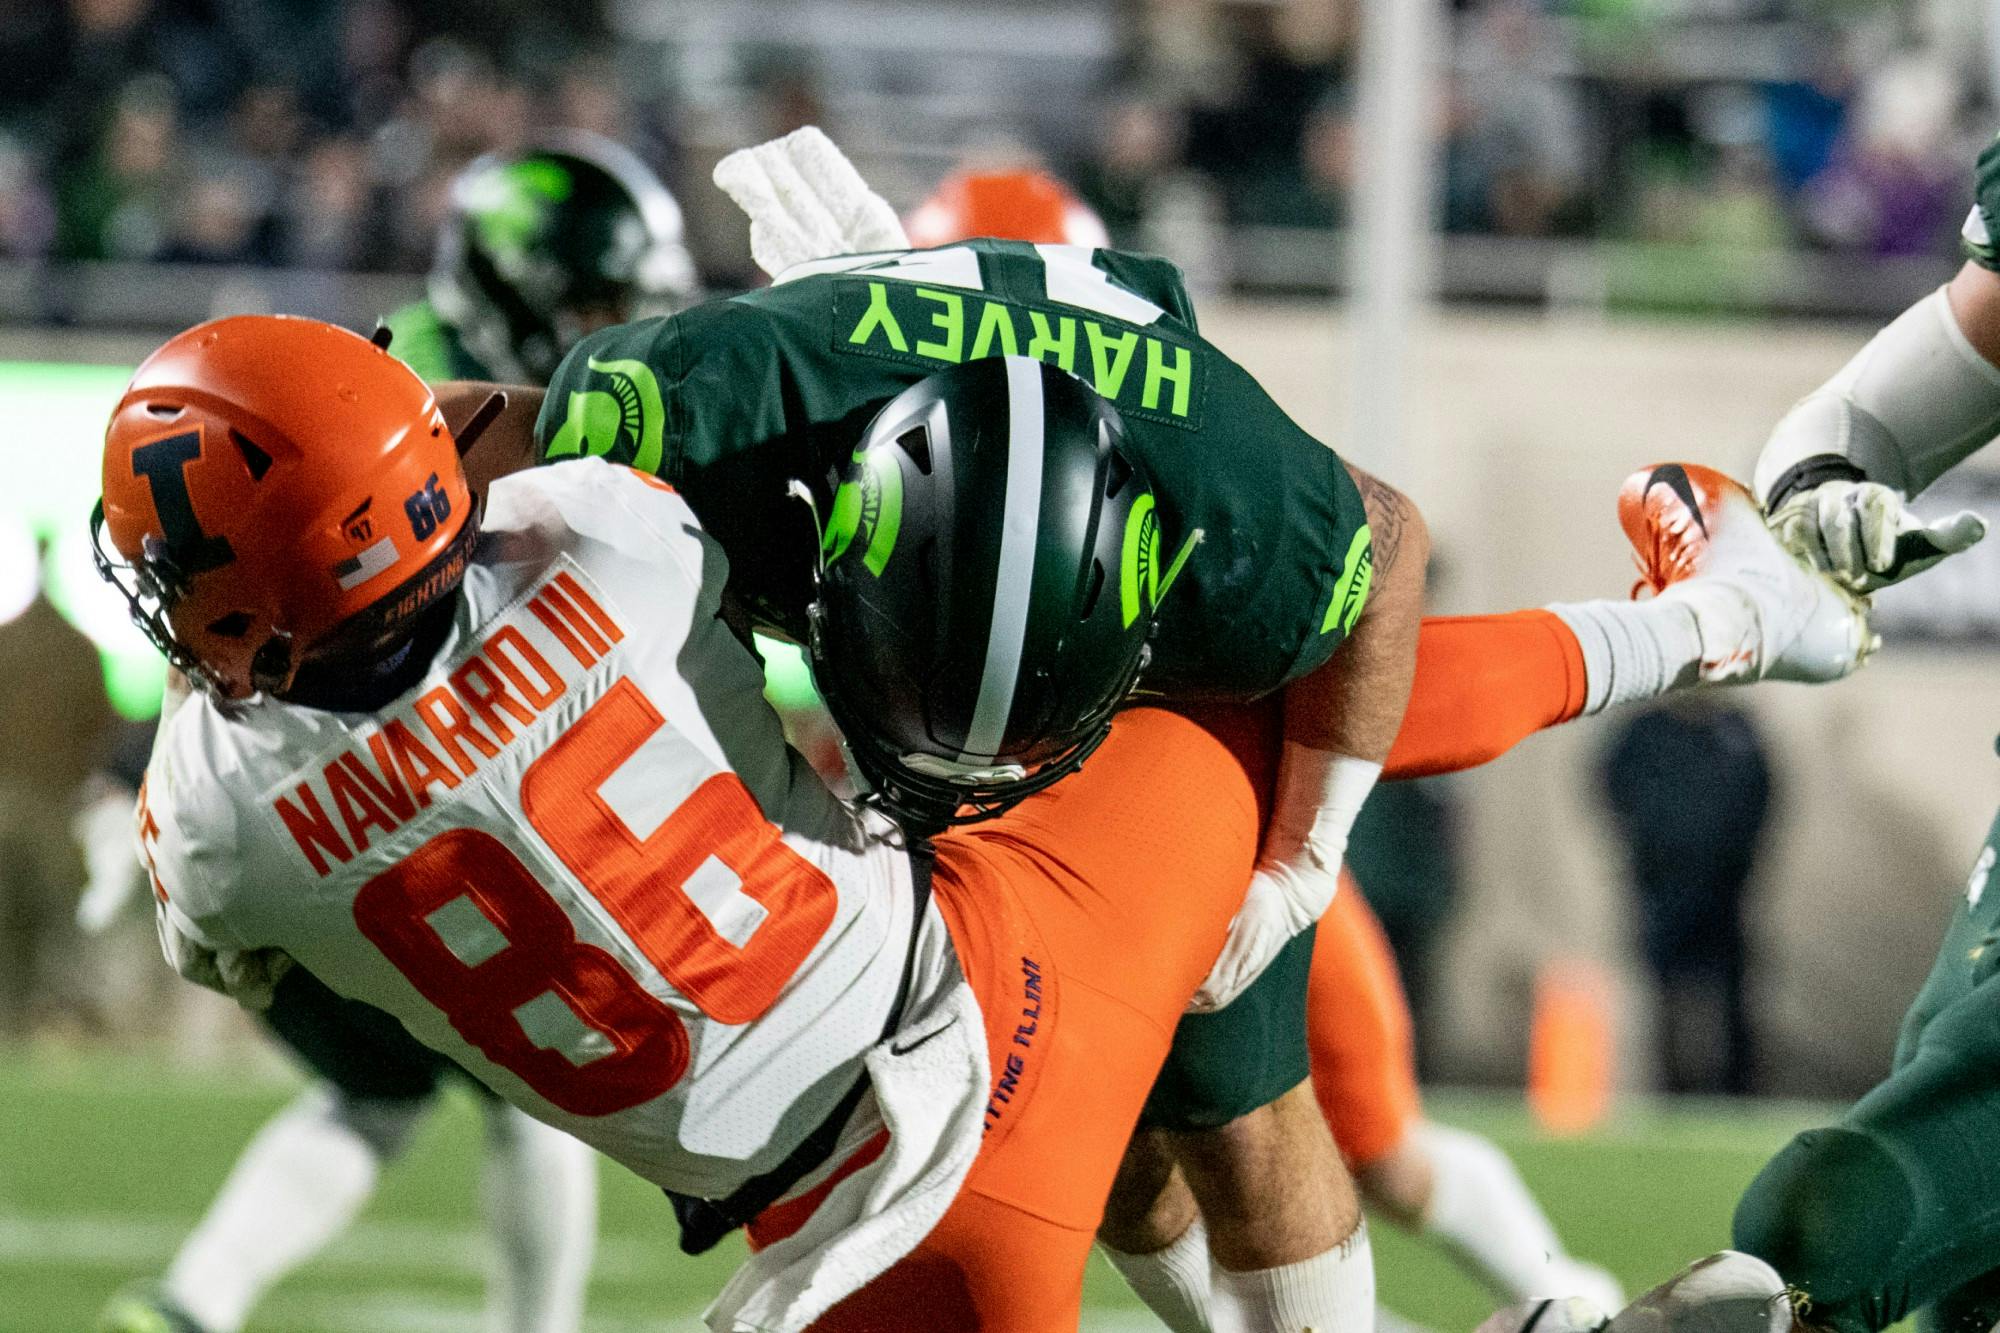 Sophomore linebacker Noah Harvey (45) tackles a ball carrier during the game against Illinois Nov. 9, 2019 at Spartan Stadium. The Spartans fell to the Fighting Illini, 37-34.